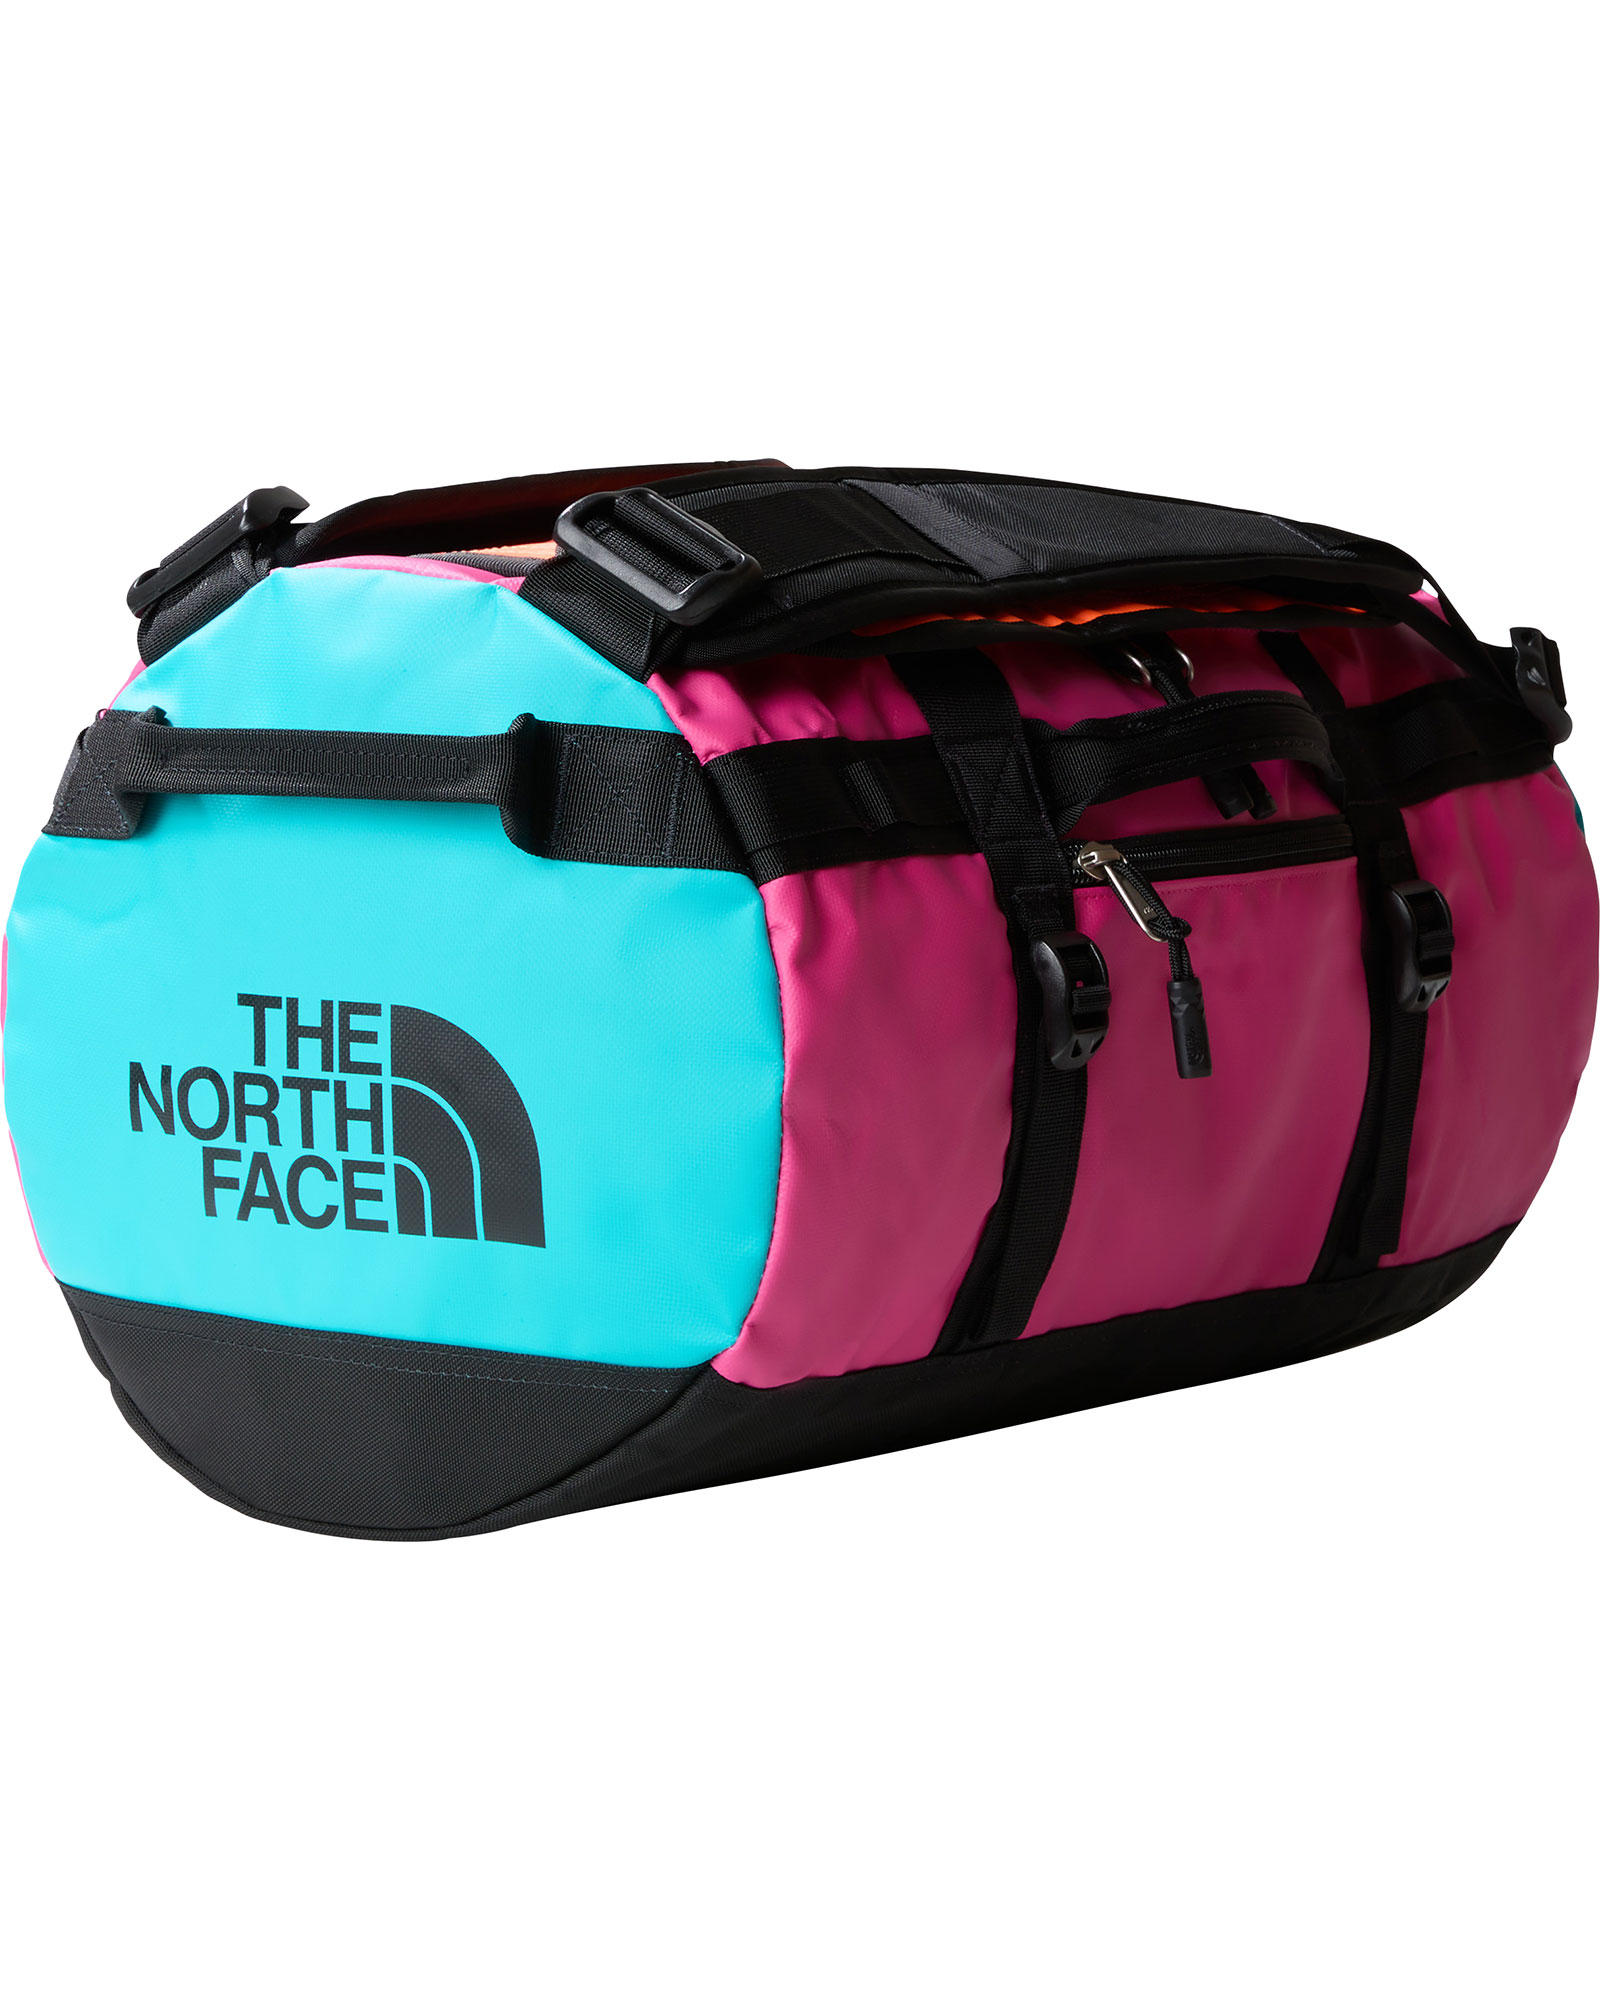 The North Face Base Camp Duffel X Small 31L - Mr Pink/Apres Blue/Power Orange